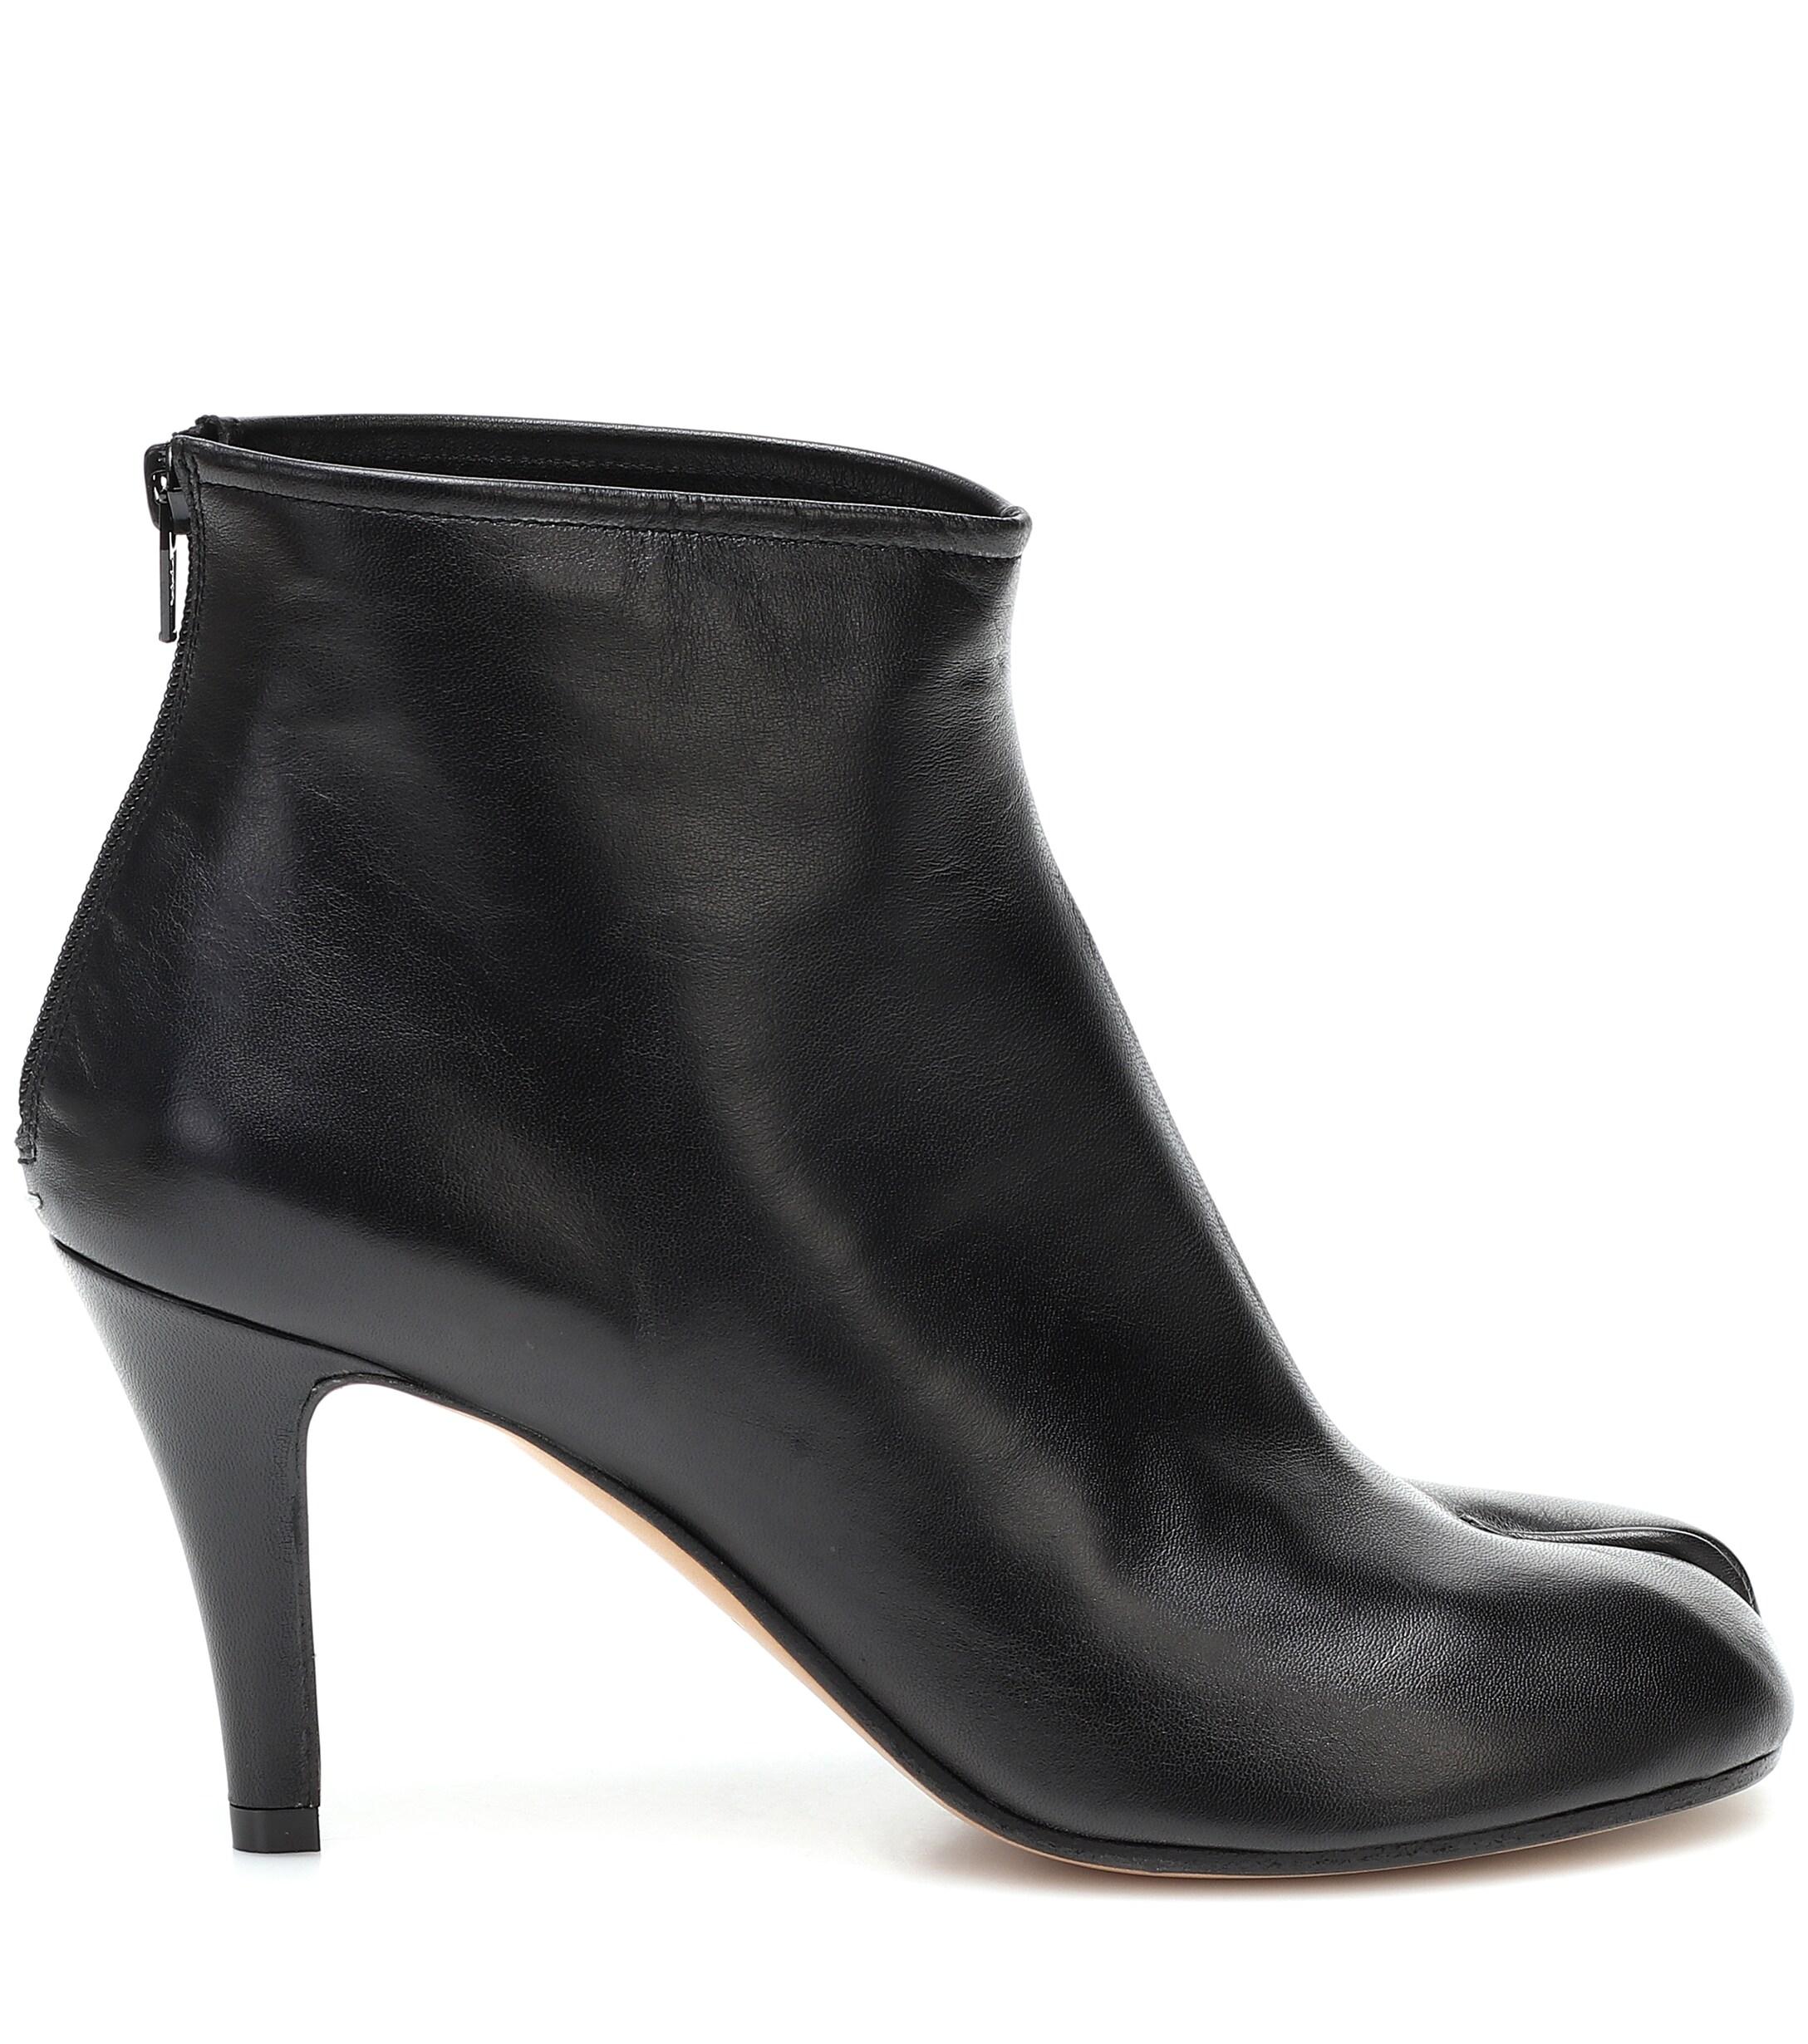 Maison Margiela Tabi Leather Ankle Boots in Black - Lyst